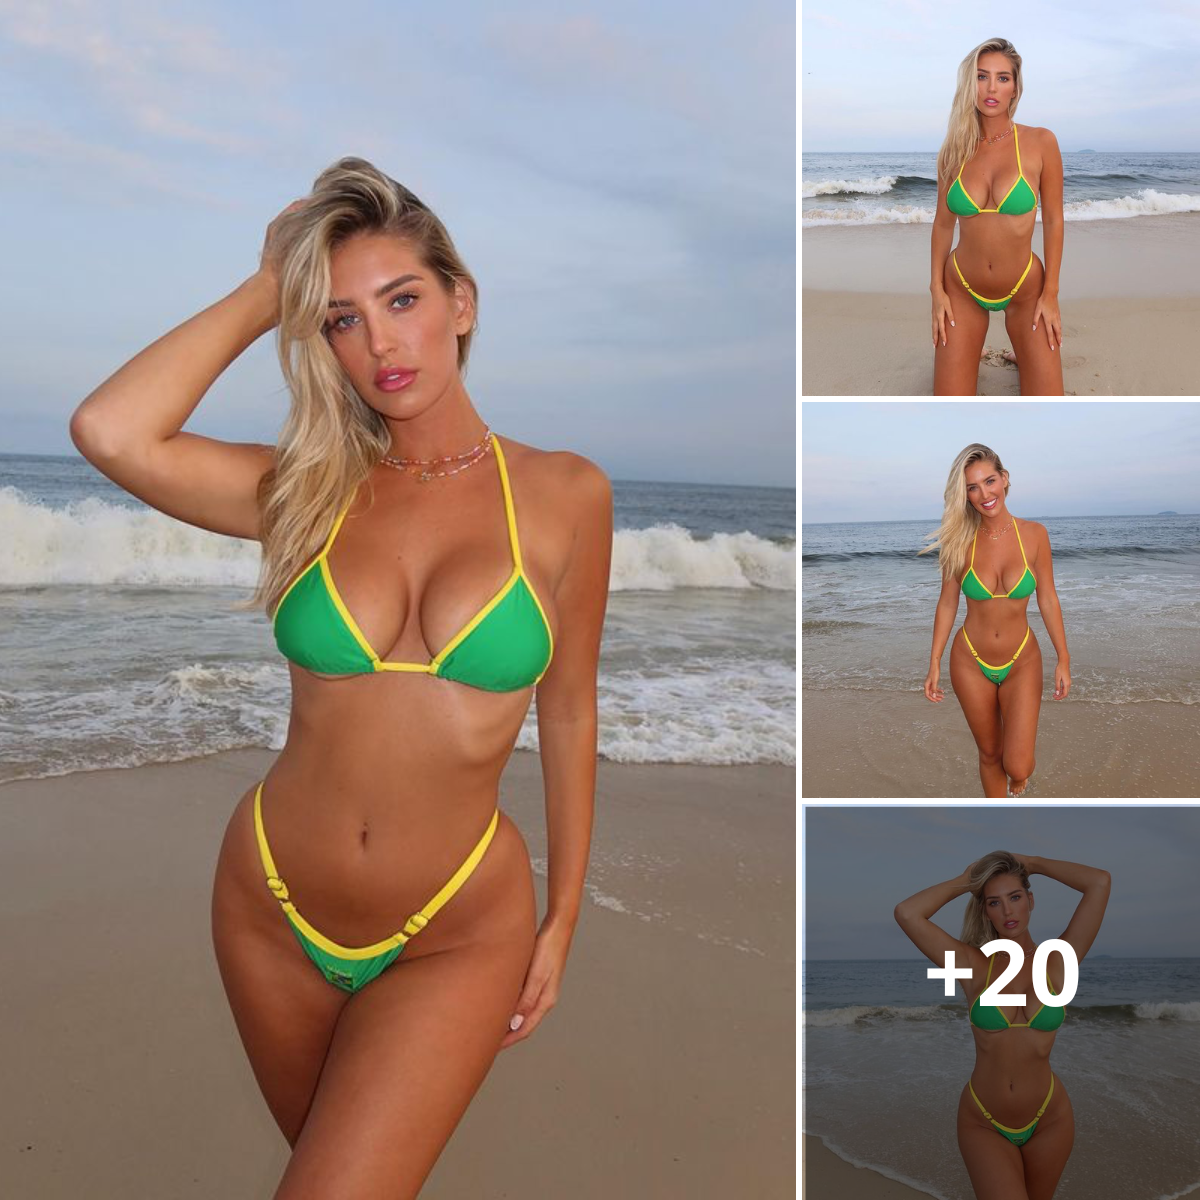 Admire the latest photo set of Skyler Simpson, extremely seductive with beautiful curves on the beach